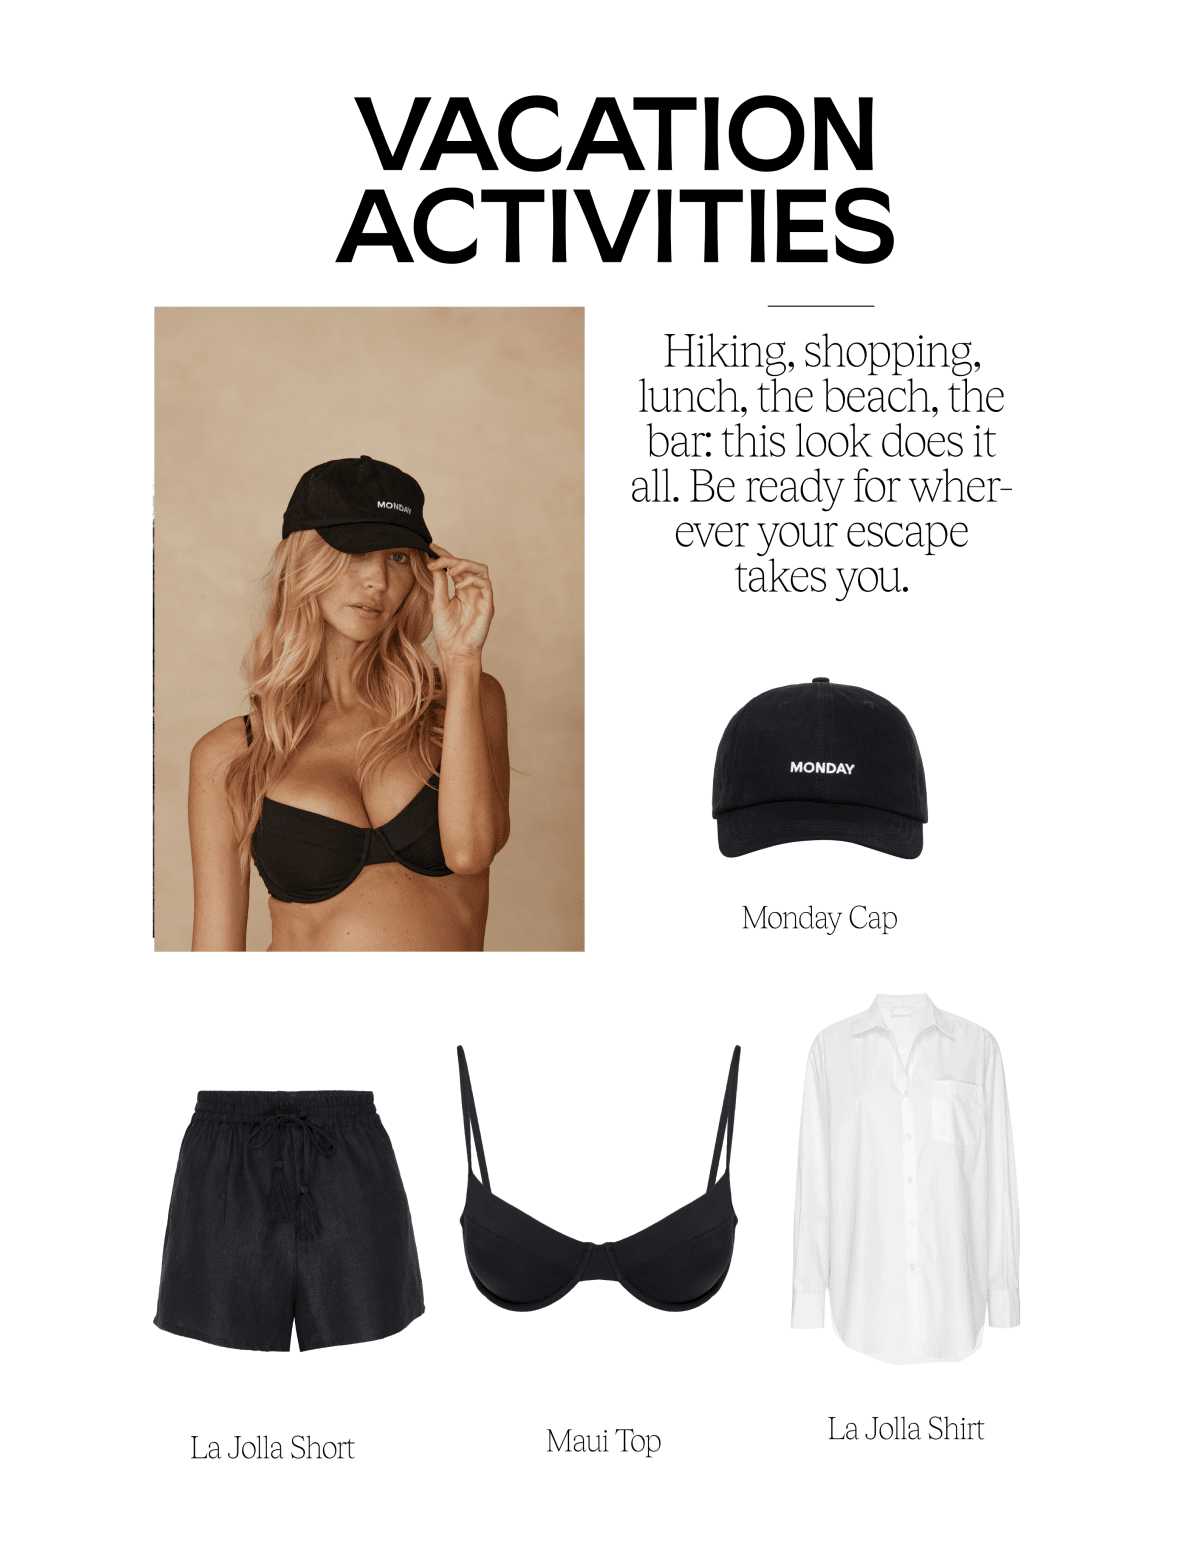 VACATION ACTIVITIES Hiking, shopping, lunch, the beach, the bar: this look does it all. Be ready for wher- EVET your escape takes youl. Monday Cap La Jolla Short Maui Top La Jolla Shirt 